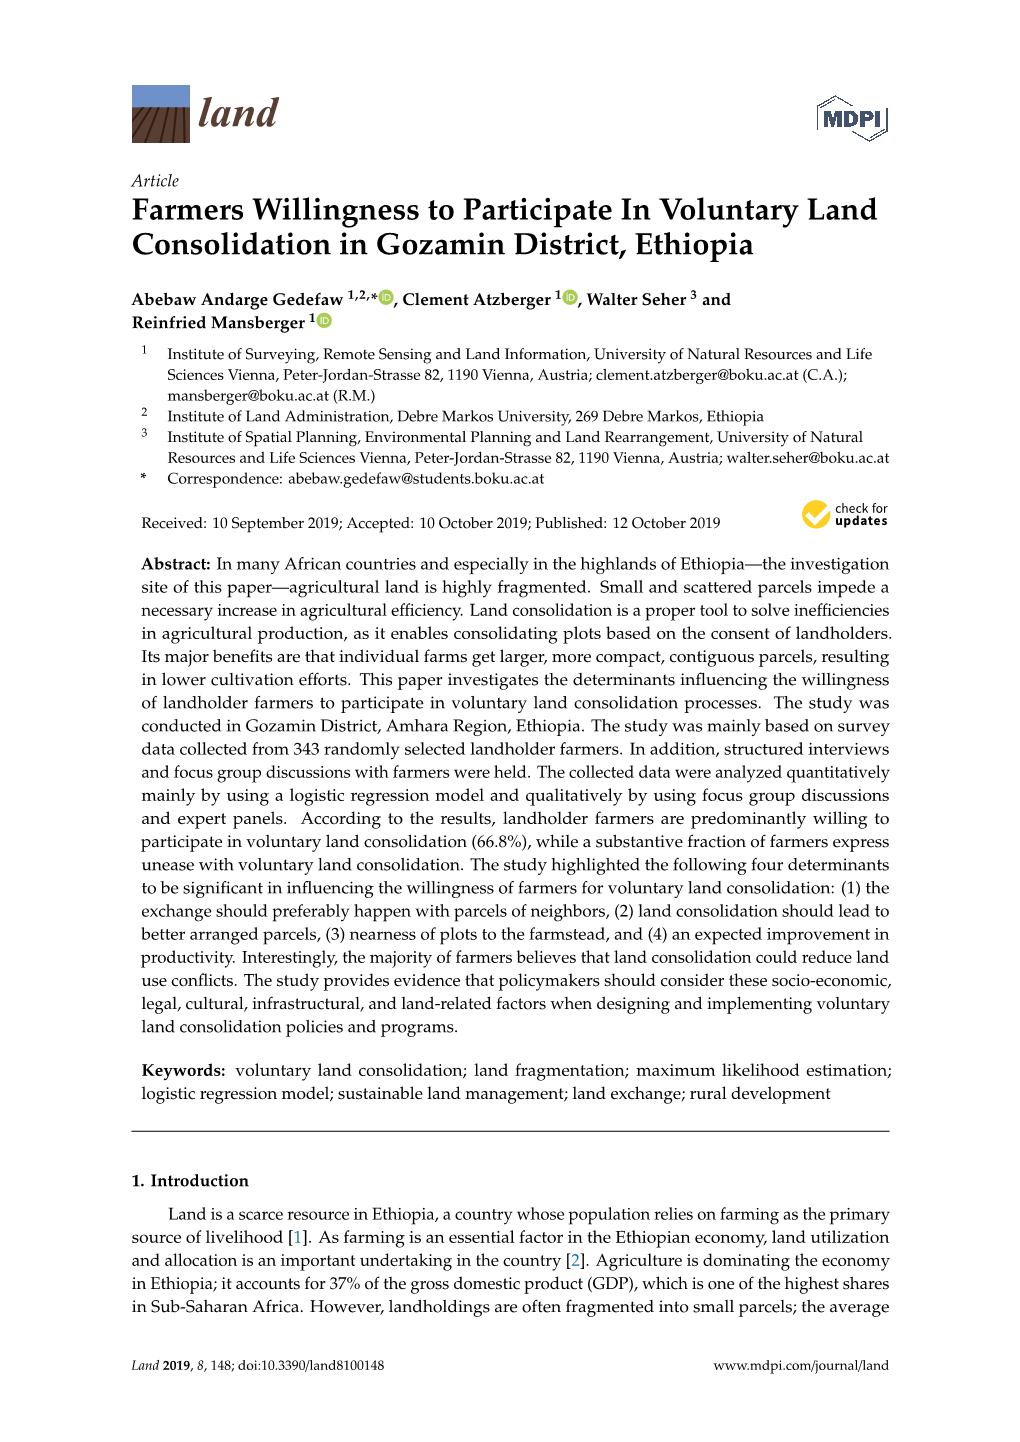 Farmers Willingness to Participate in Voluntary Land Consolidation in Gozamin District, Ethiopia